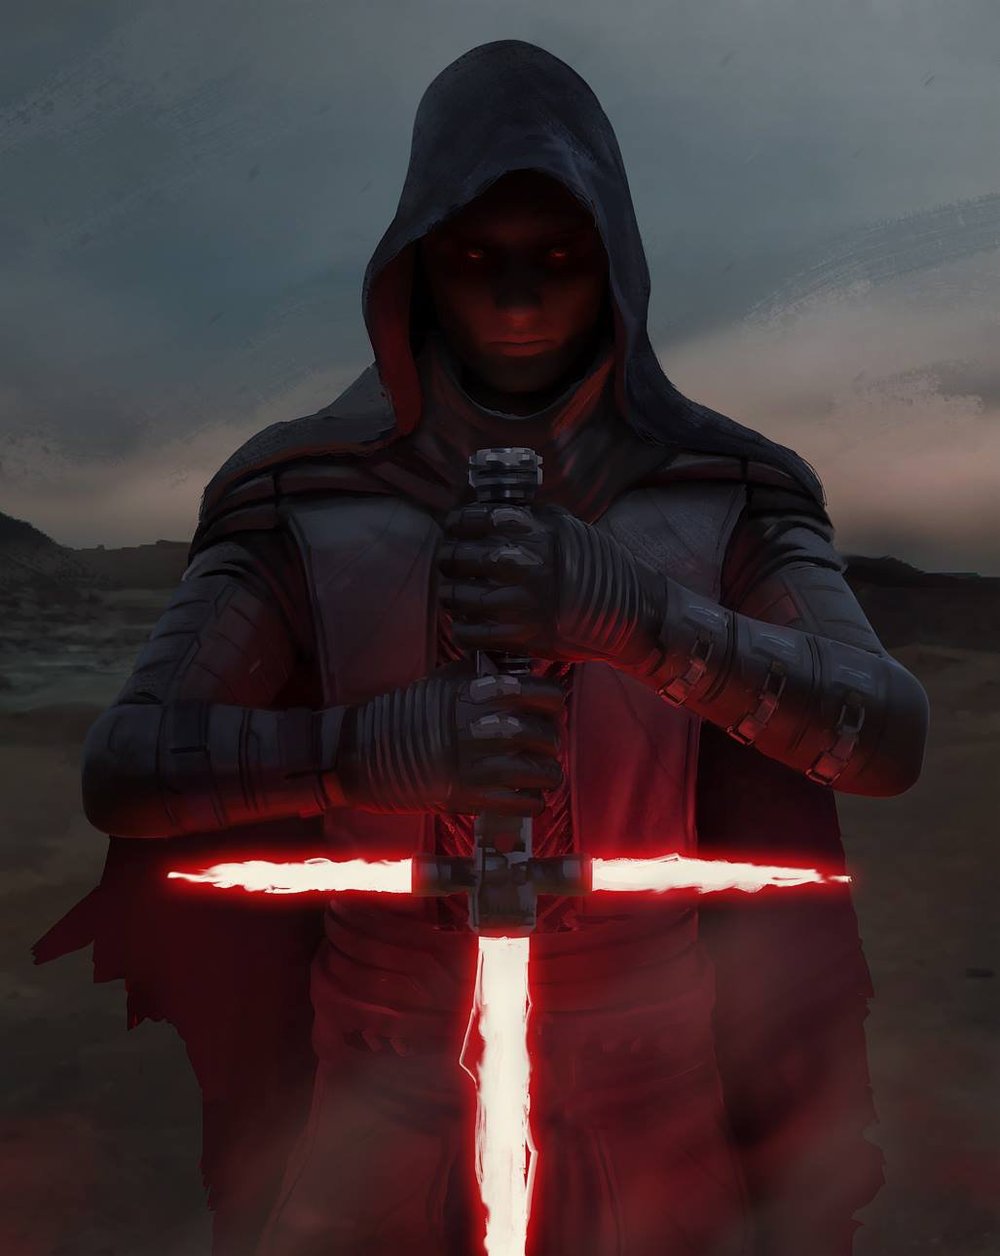 Art Movie Sith Lord Star Wars The Force Awakens about a year ago by